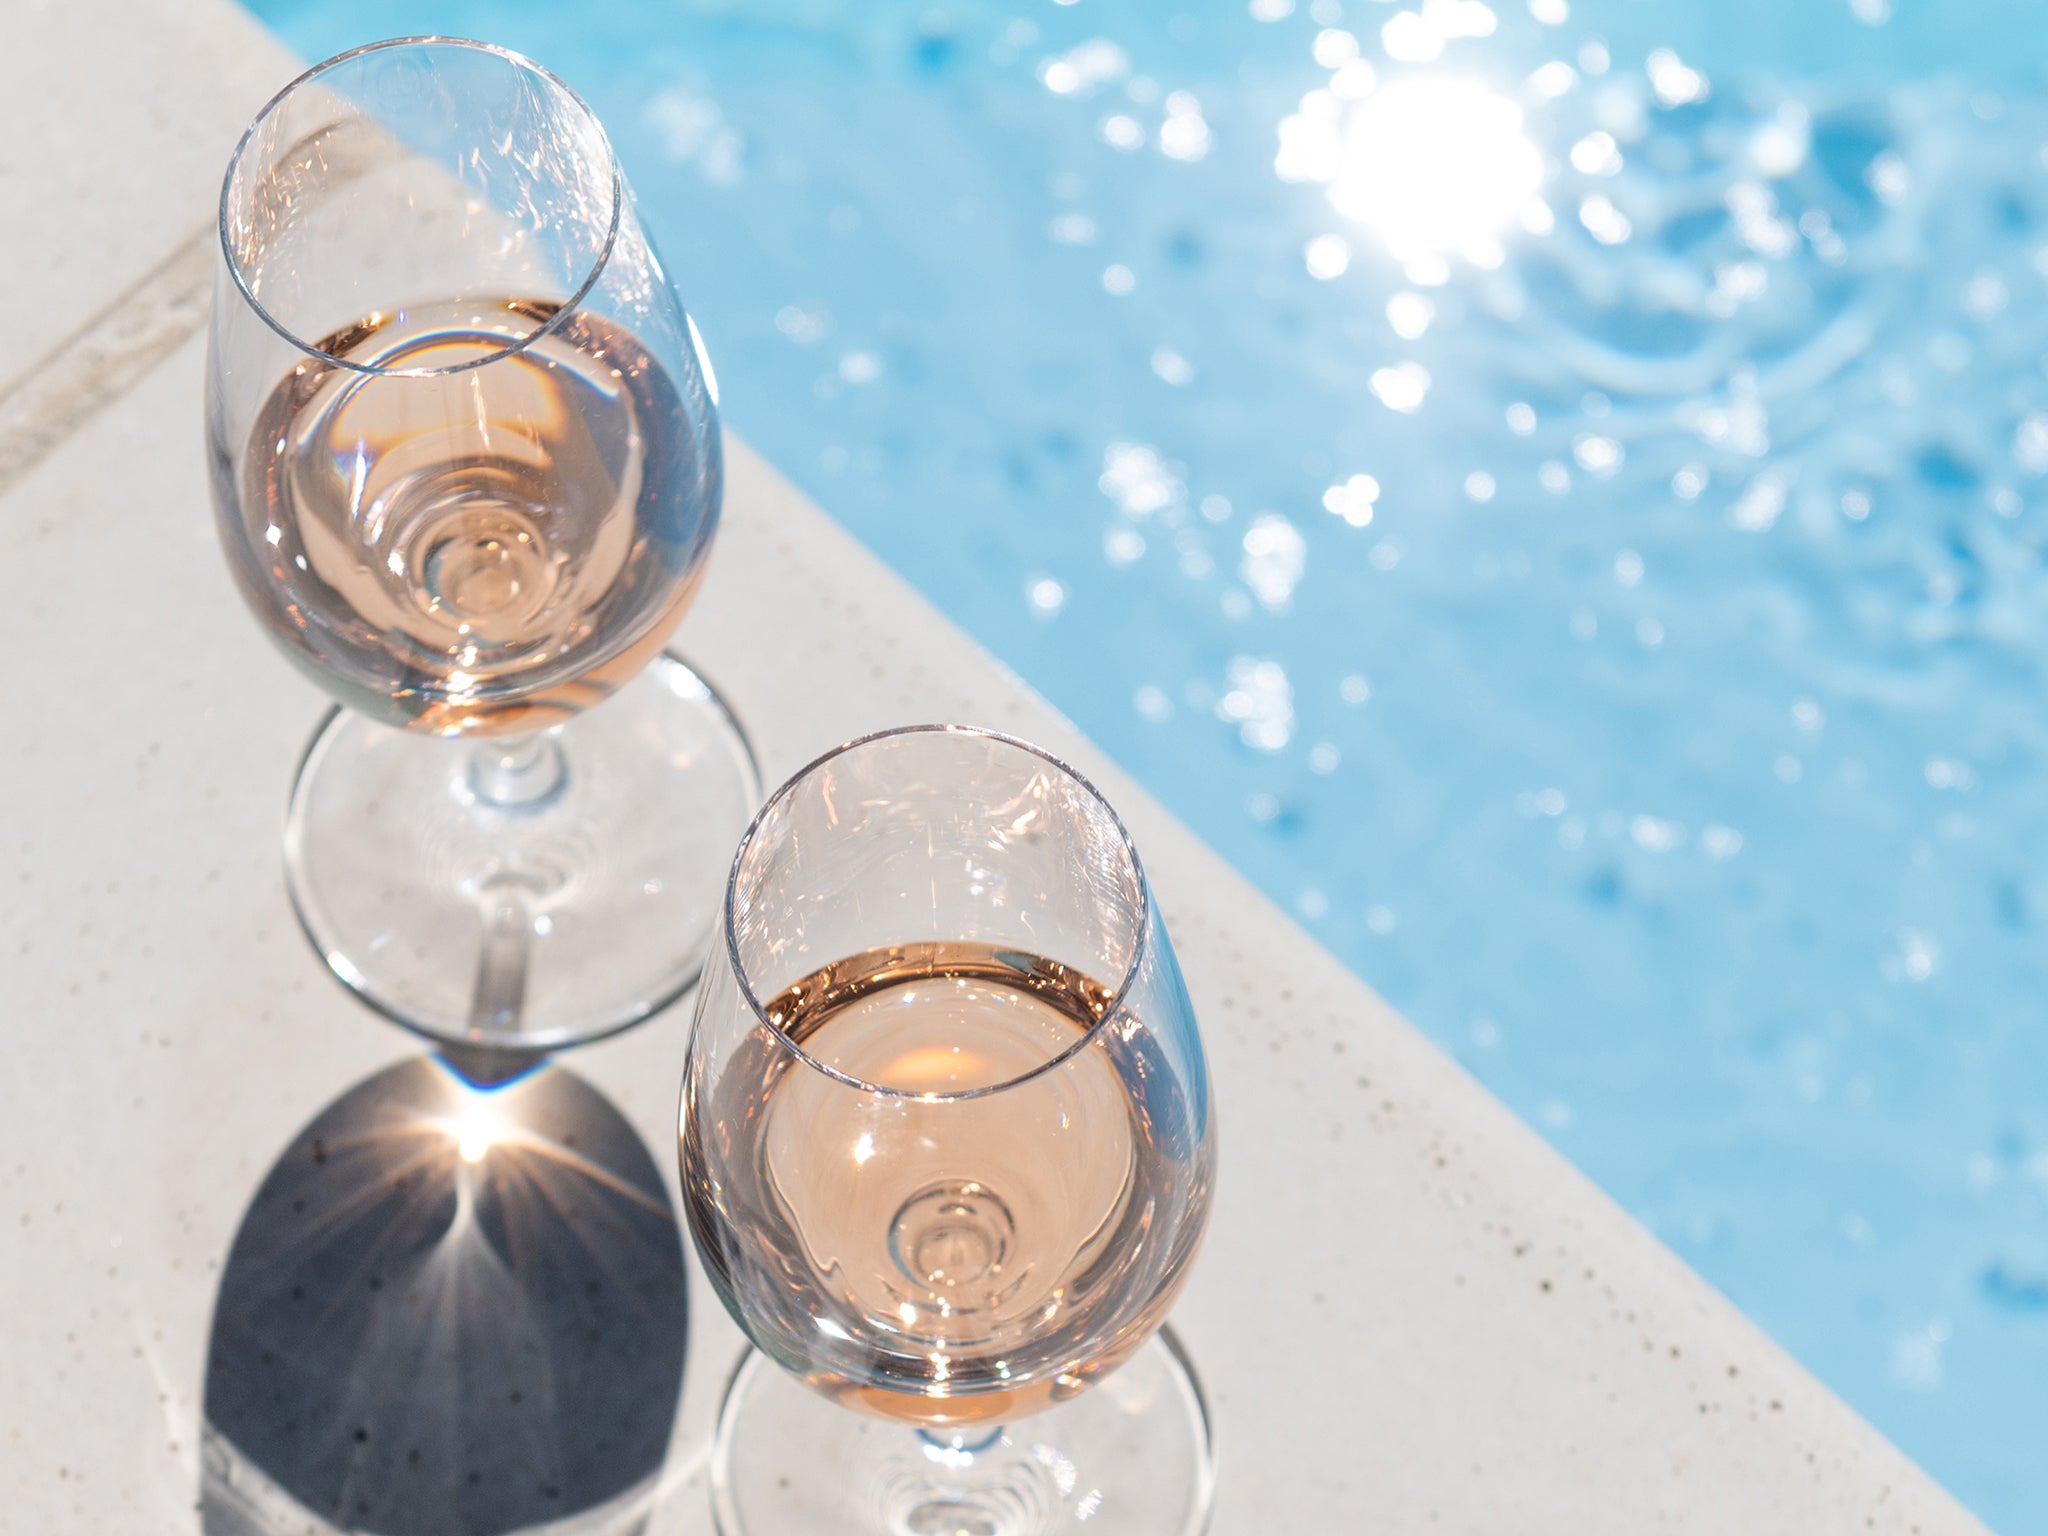 Most rosé can be enjoyed all year round